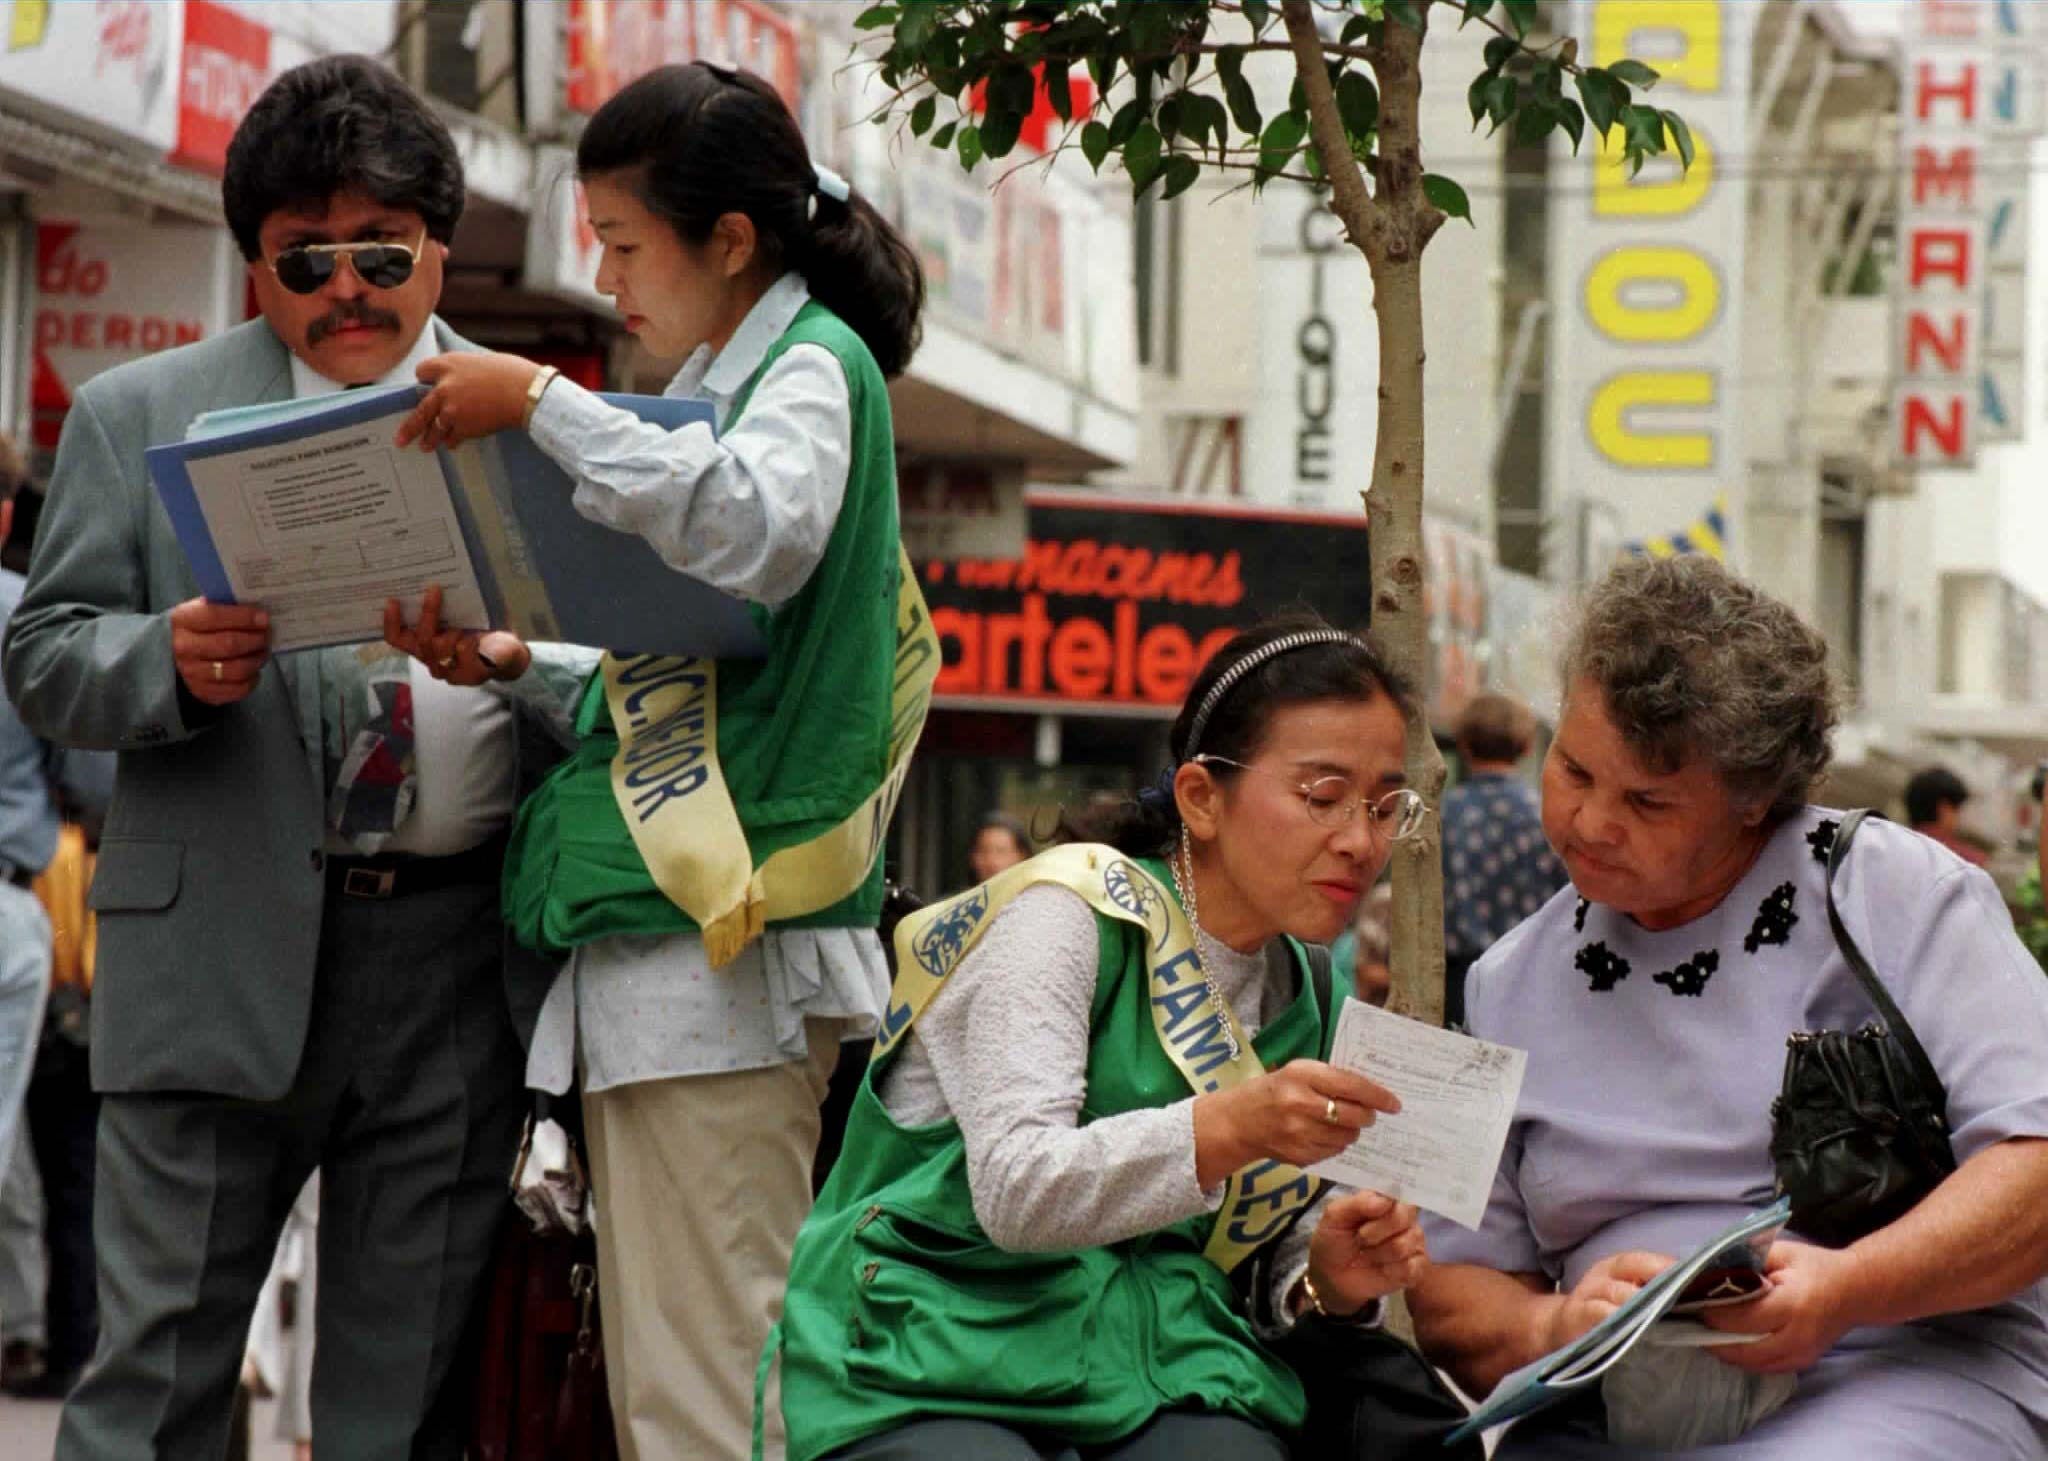 Unification Church members show documents to passersby on a street in 1997